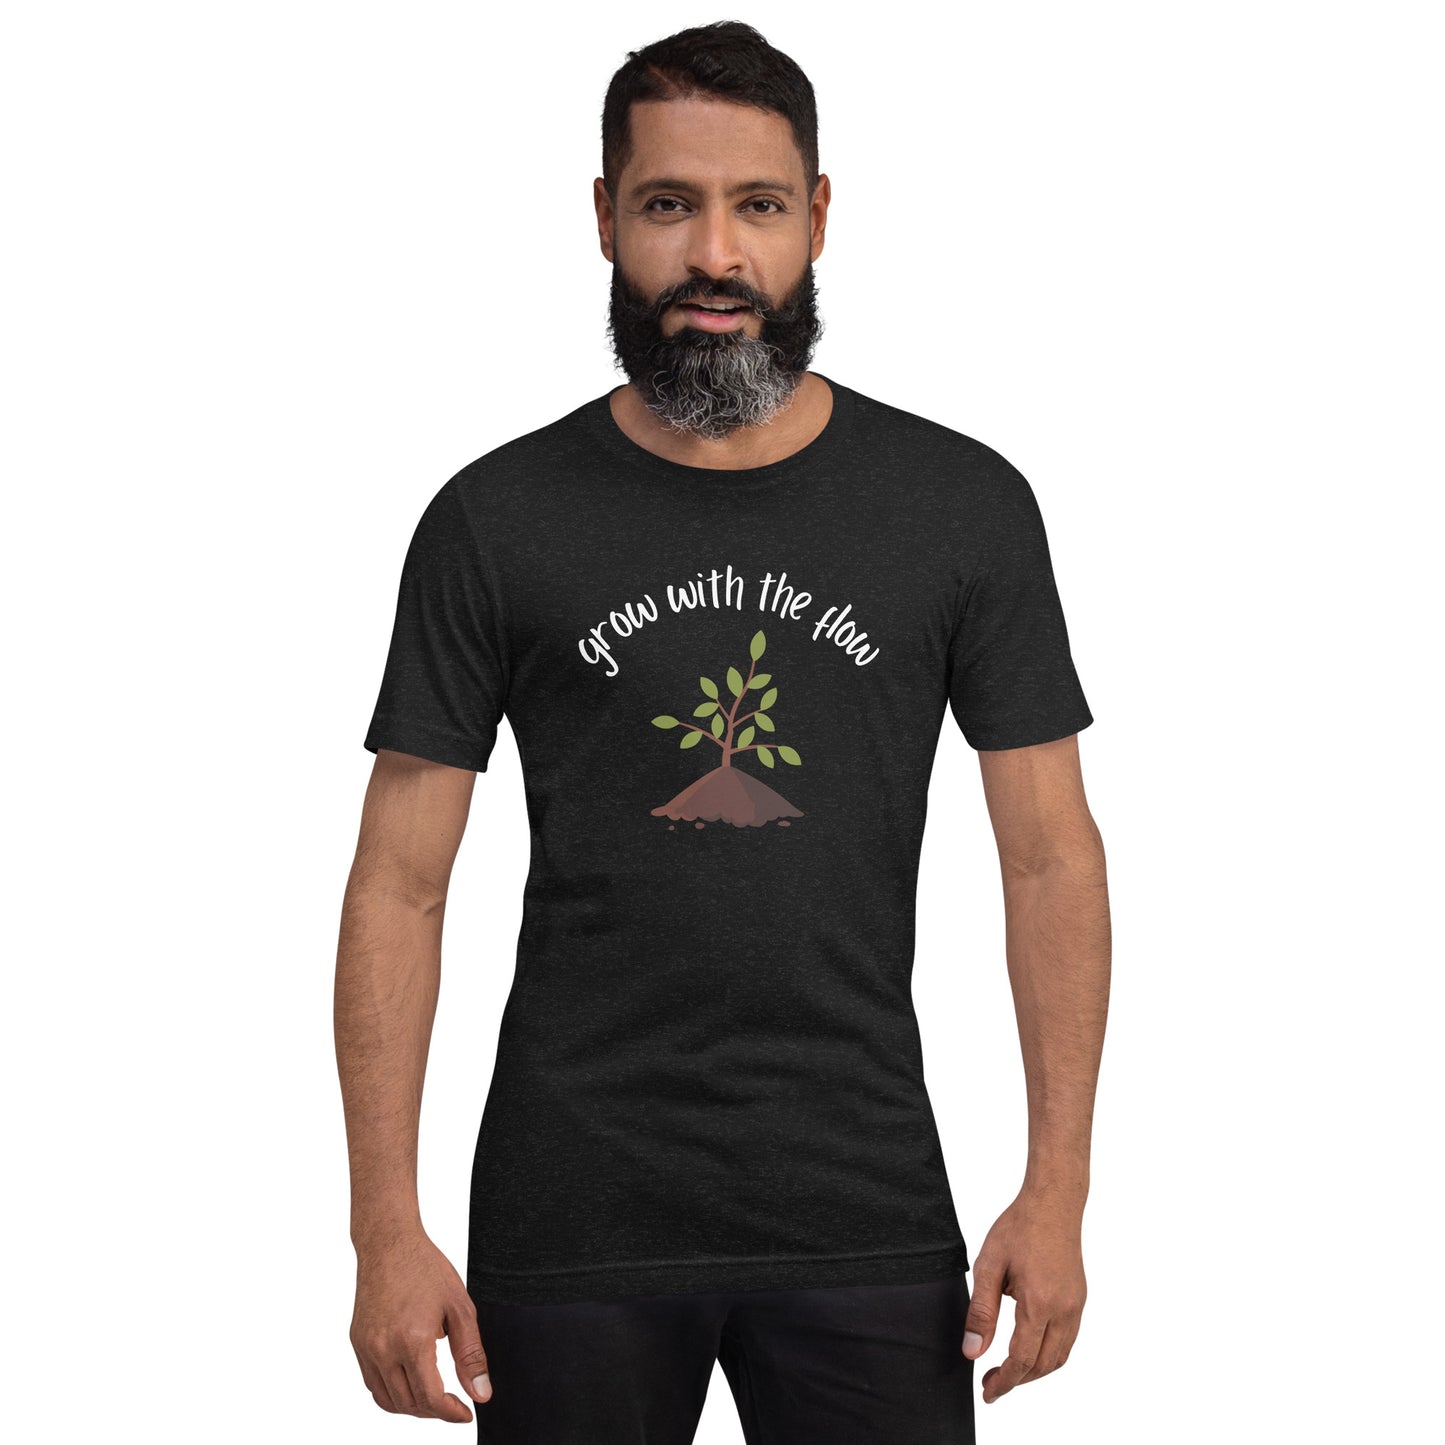 Grow With the Flow - Unisex T-shirt